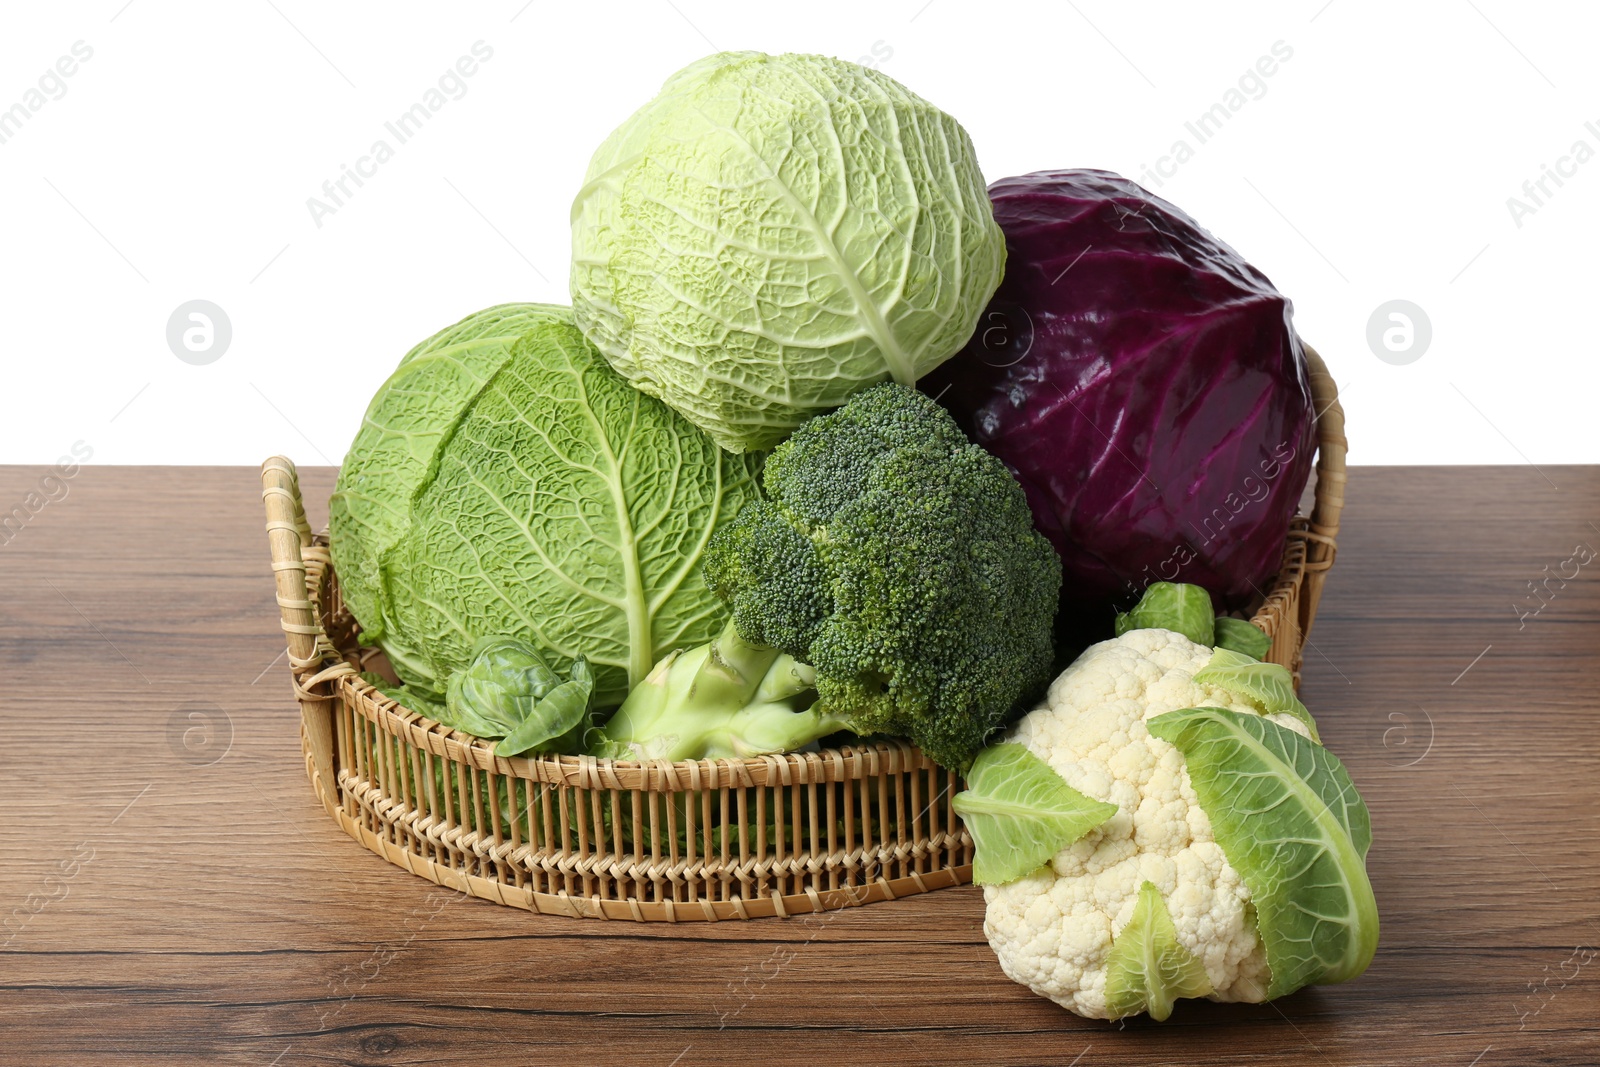 Photo of Wicker tray with different types of fresh cabbage on wooden table against white background